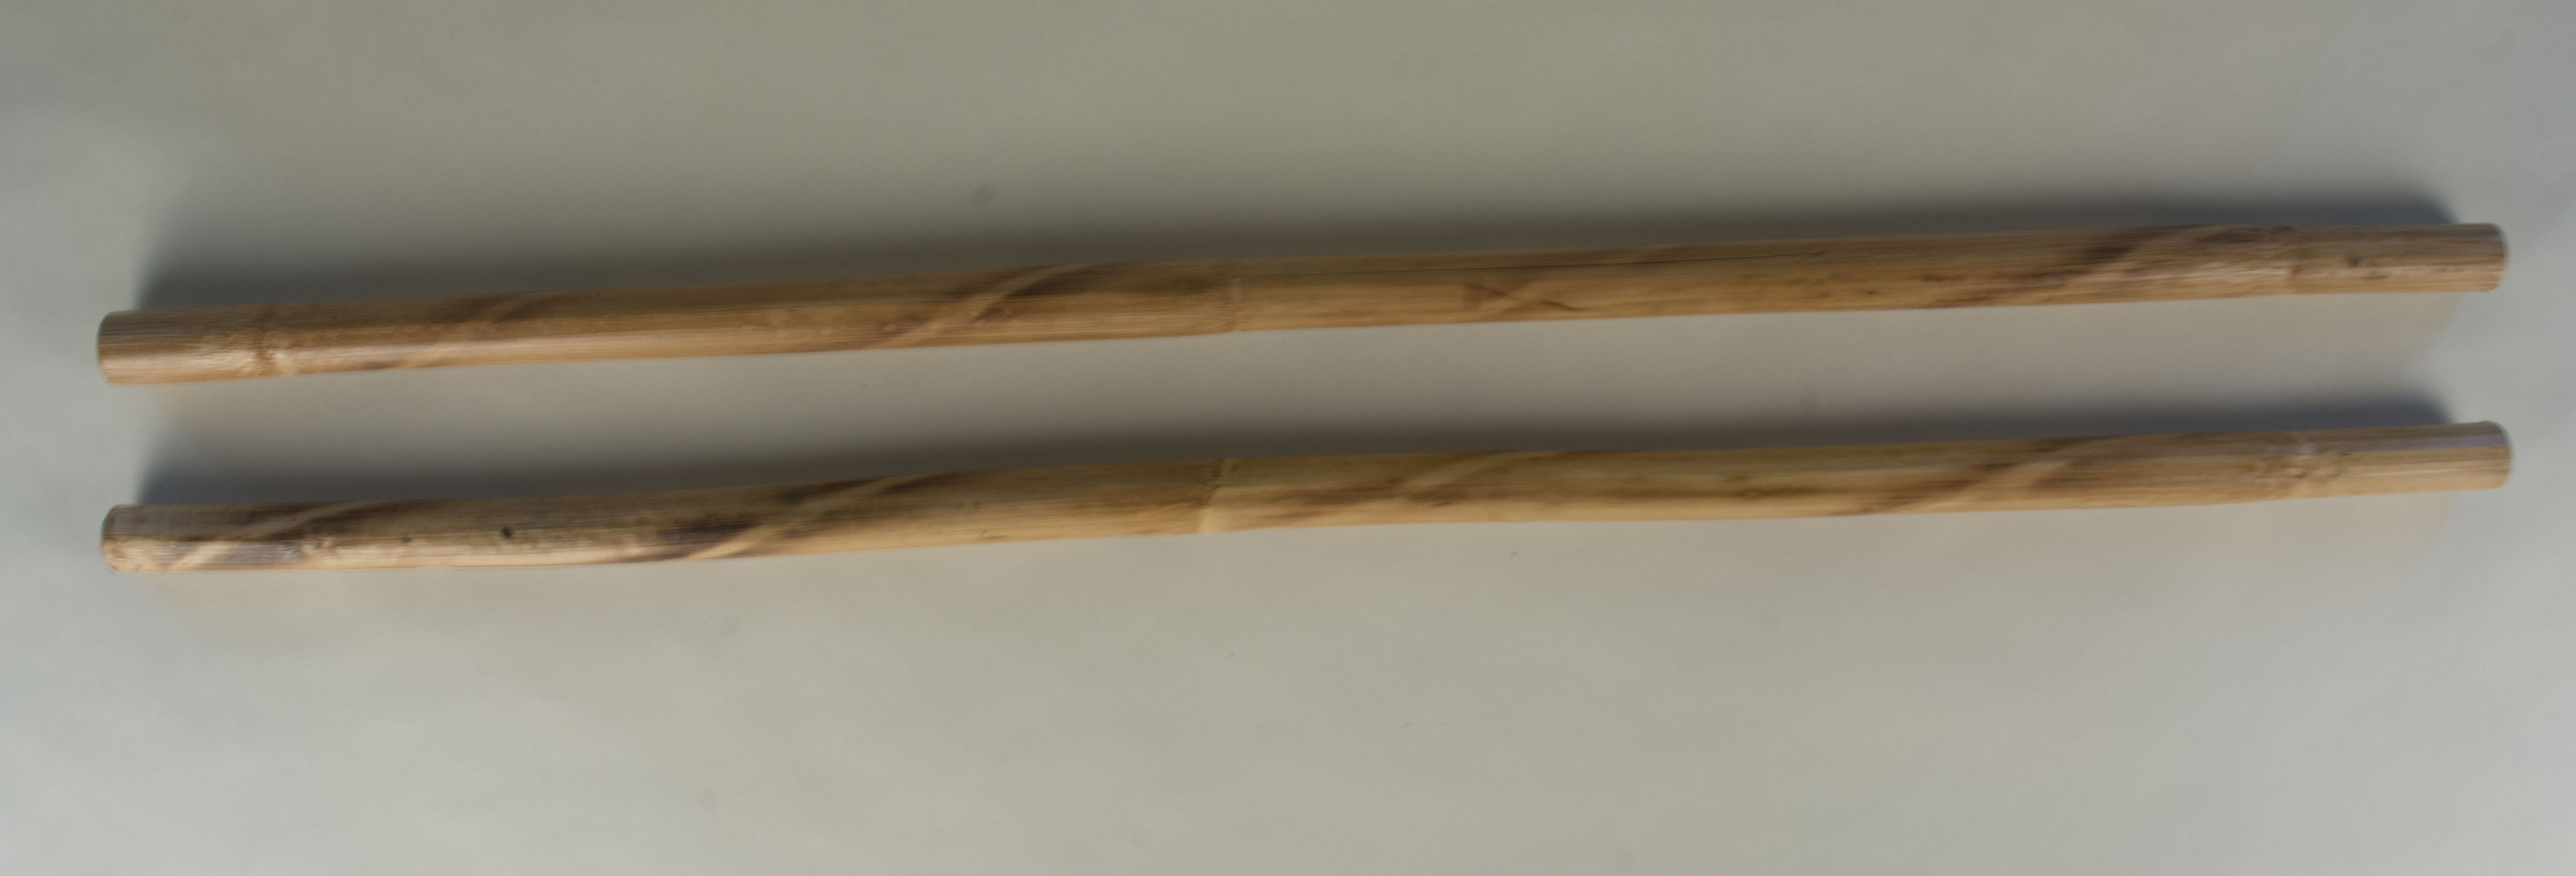 Kali sticks owned by Virginia B. Capulong- front view. Acquired in 2008 from small vendor in Vigan. Rhodessa noted that she is very interested in kali as combat/martial art. She finds the movements graceful. Any views, findings, conclusions, or recommendations expressed in this story do not necessarily represent those of the National Endowment for the Humanities. 